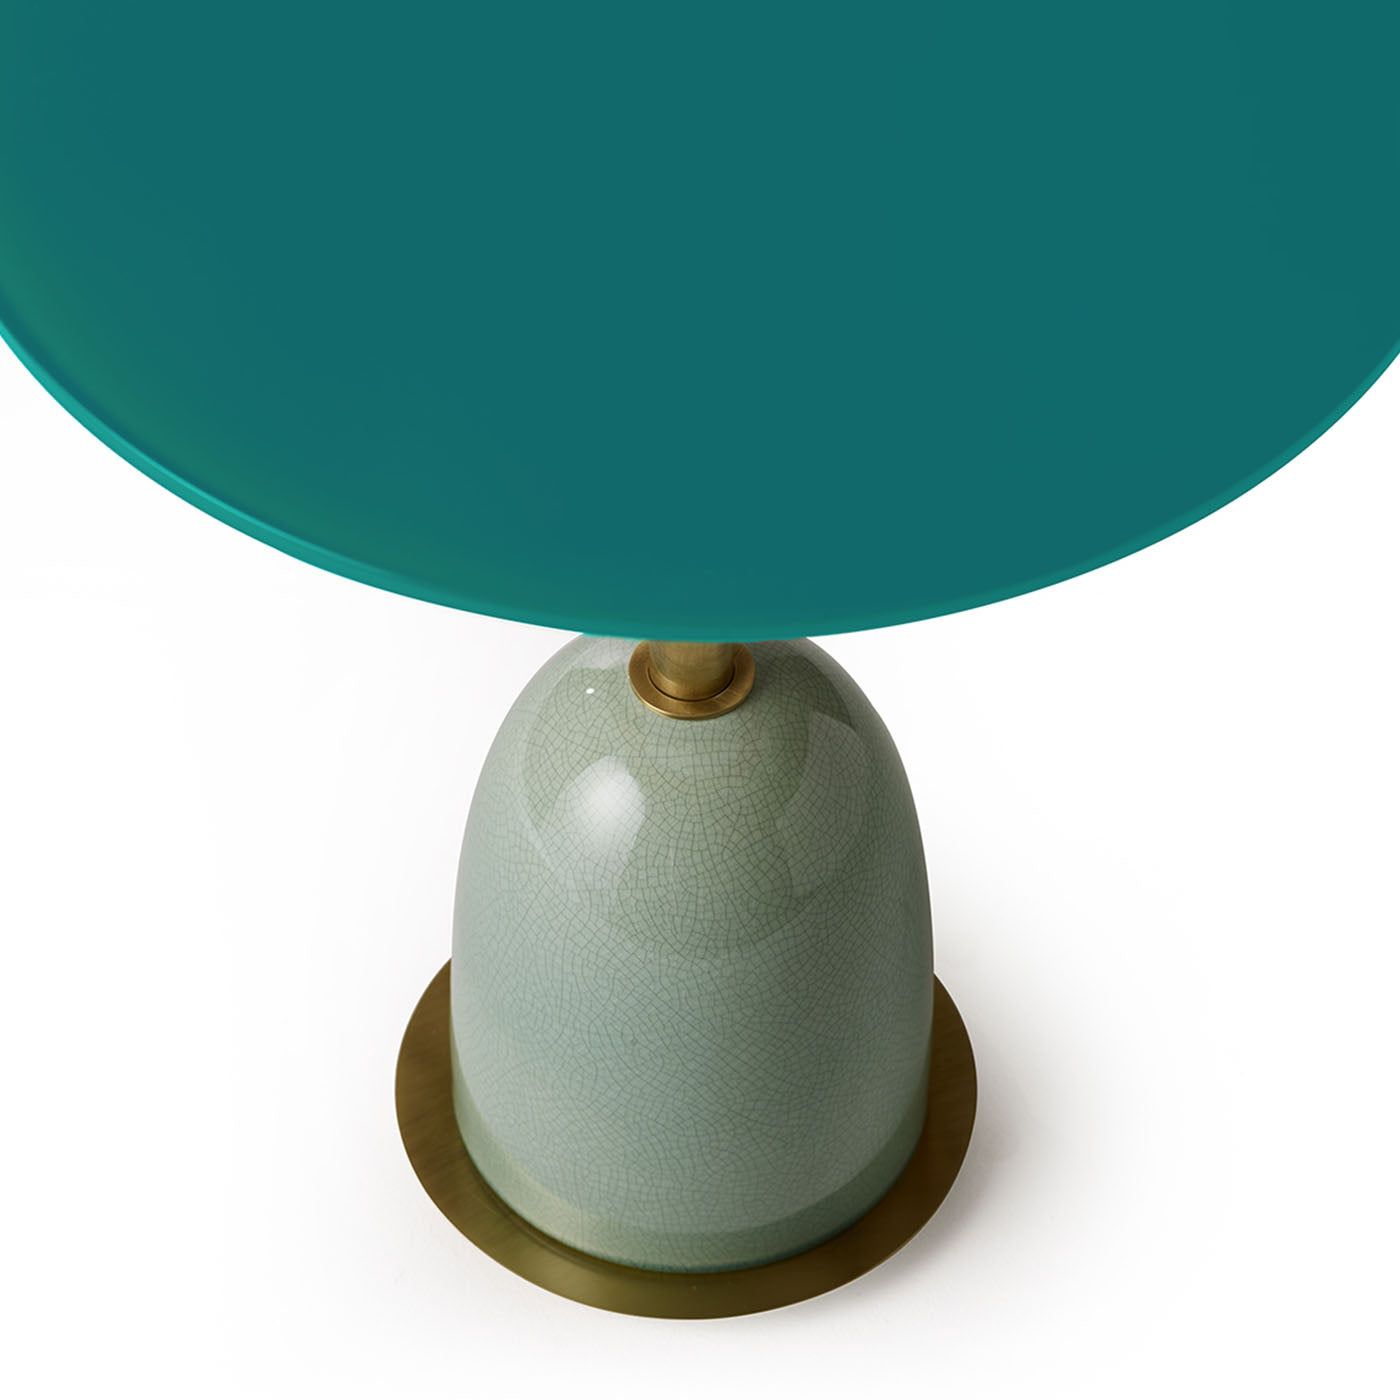 Pins Medium Turquoise Side Table - Alternative view 1